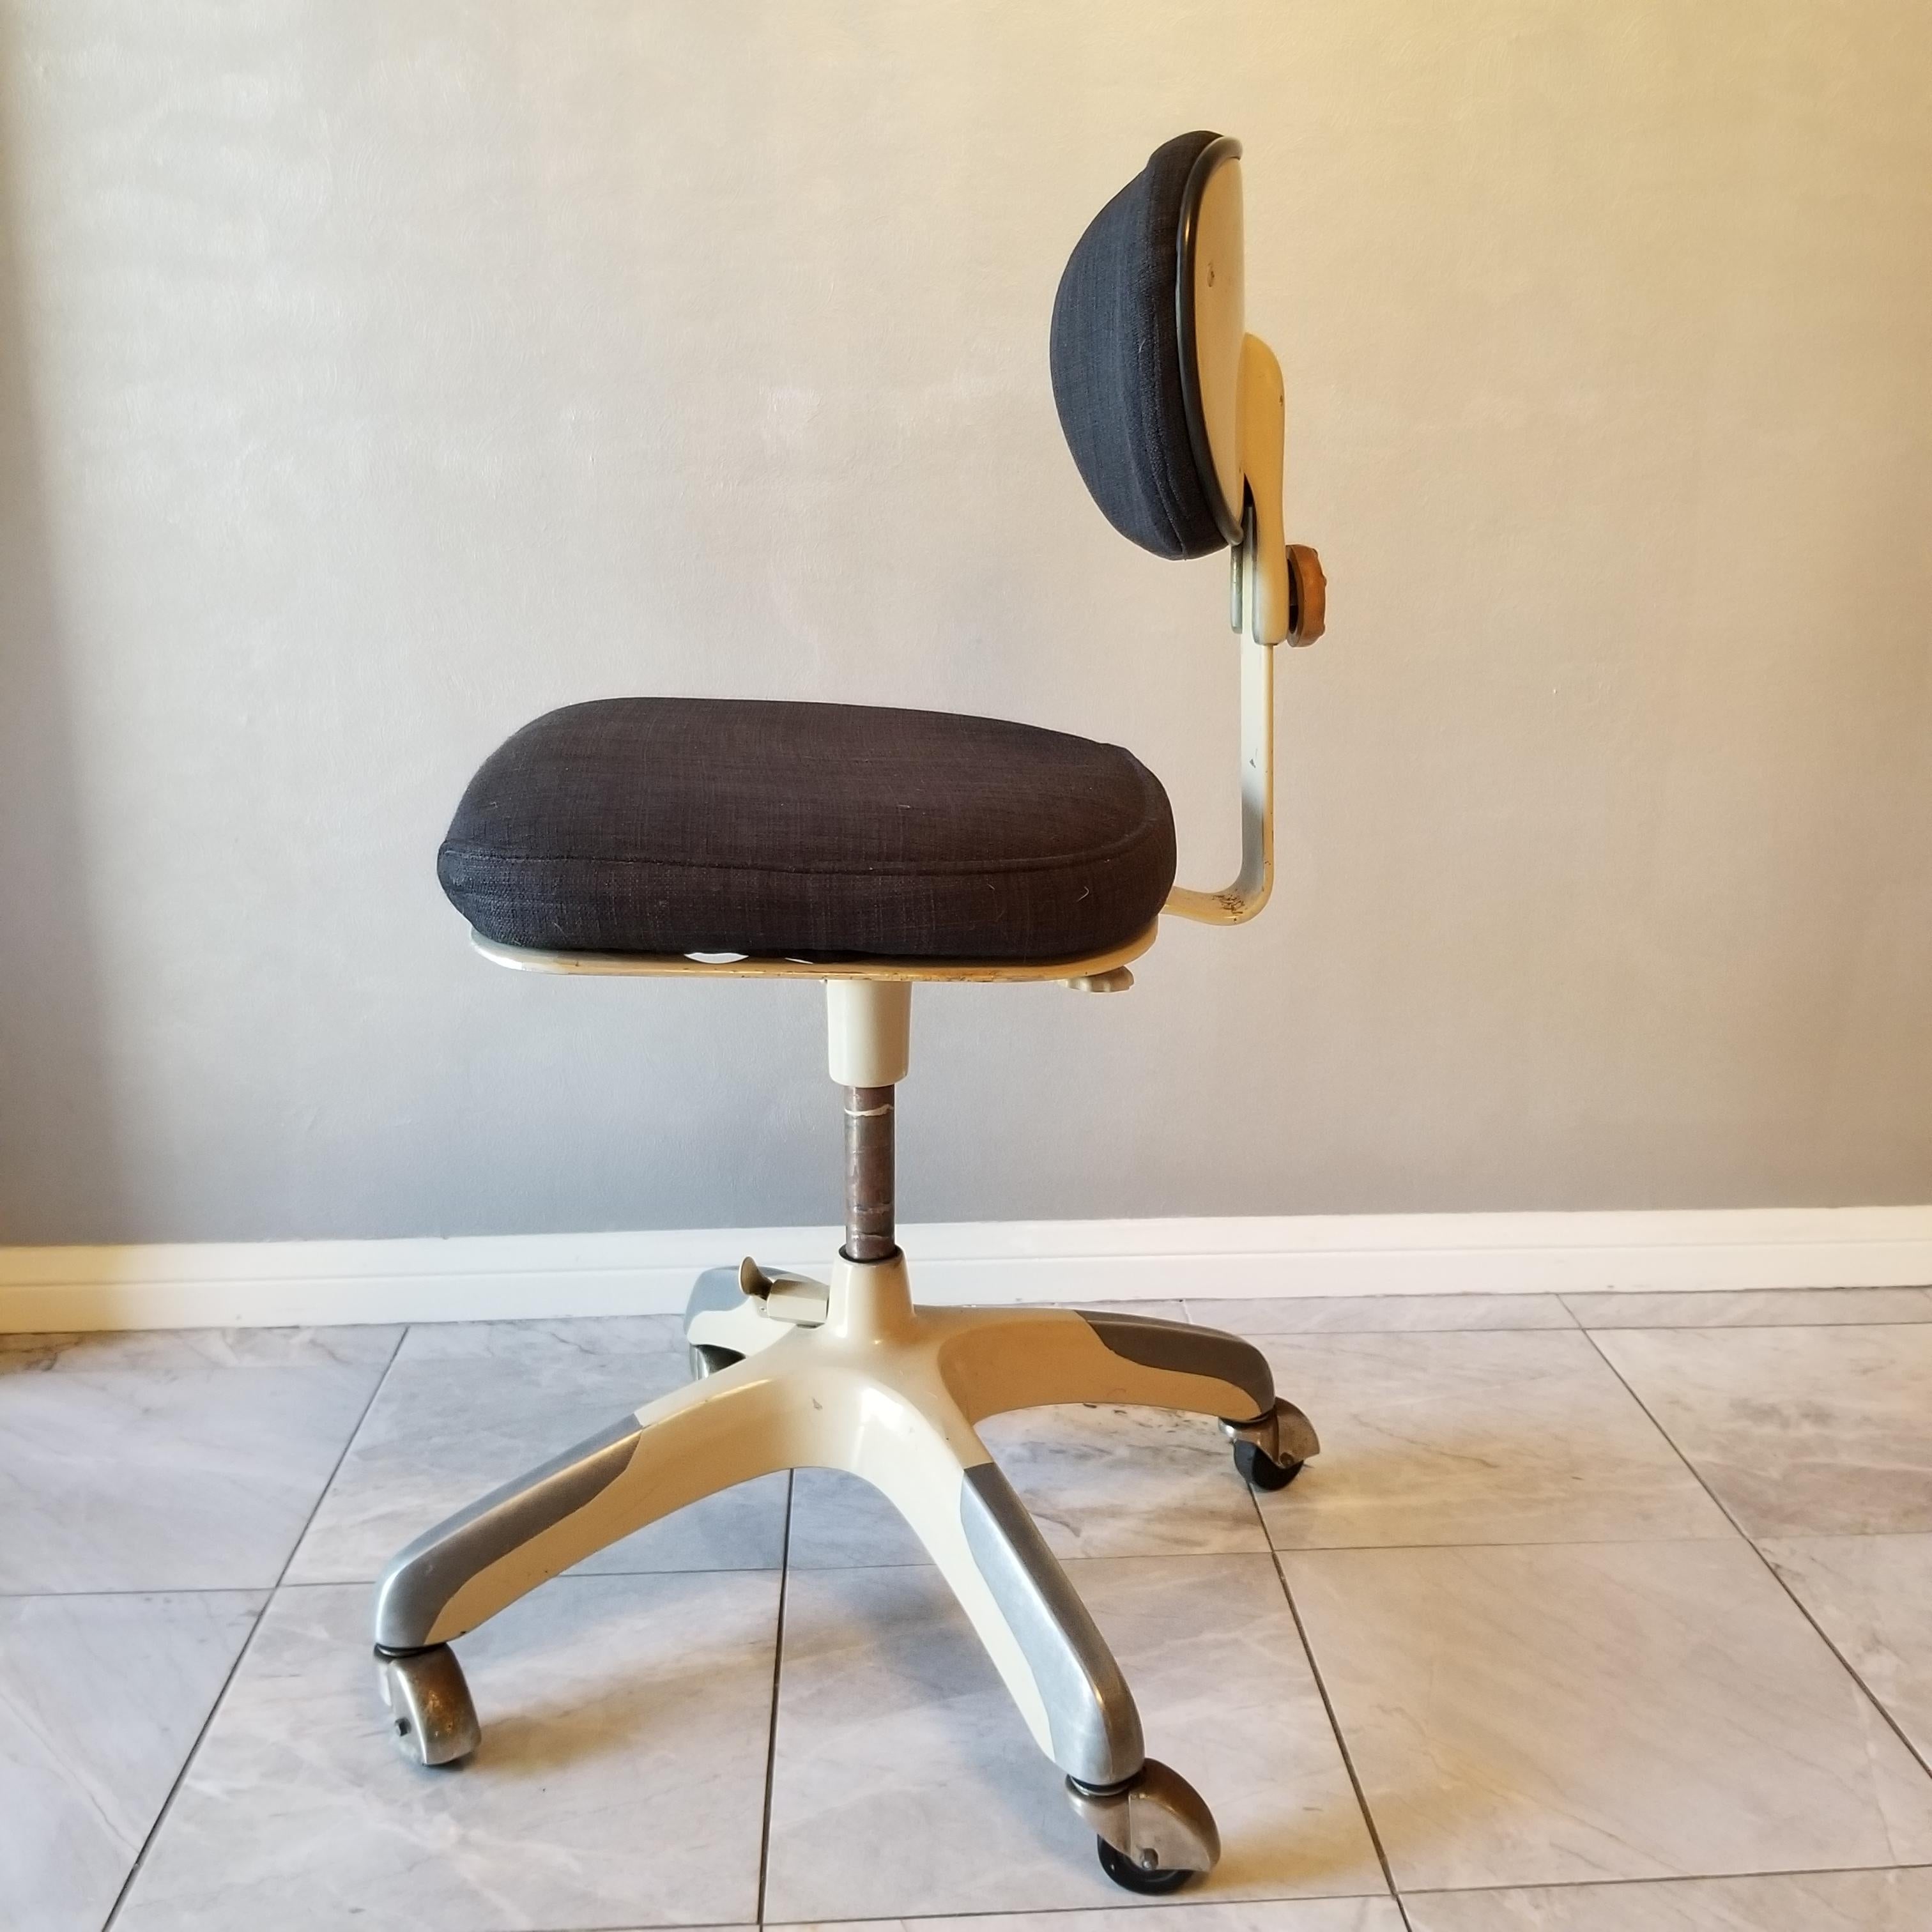 A midcentury Classic: 1950s vintage office desk chair by Cramer Company of Kansas City, a rolling tanker business chair.
This is their air flow posture chair model.
Colors are black fabric on a cream and silver metal base. Chair screams 1950s